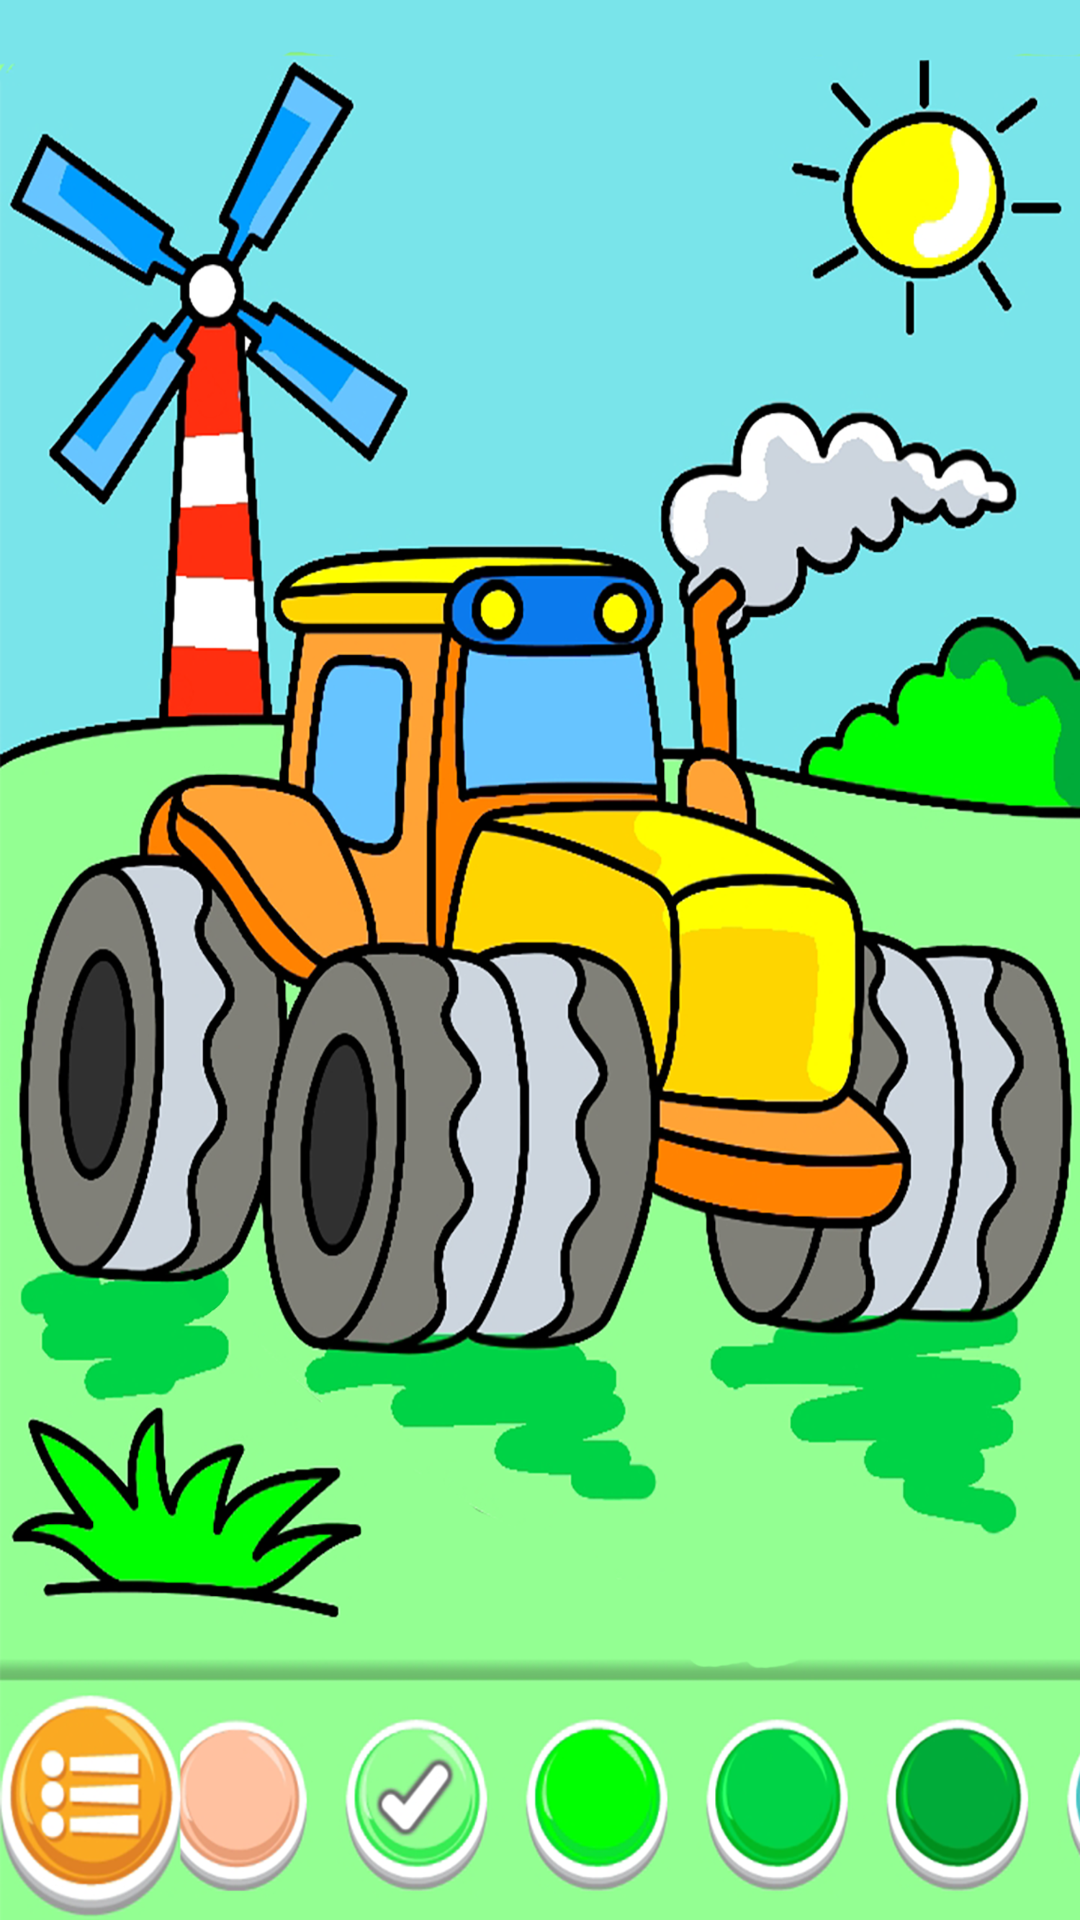 Cars Coloring Book for Kids - Doodle, Paint & Draw遊戲截圖